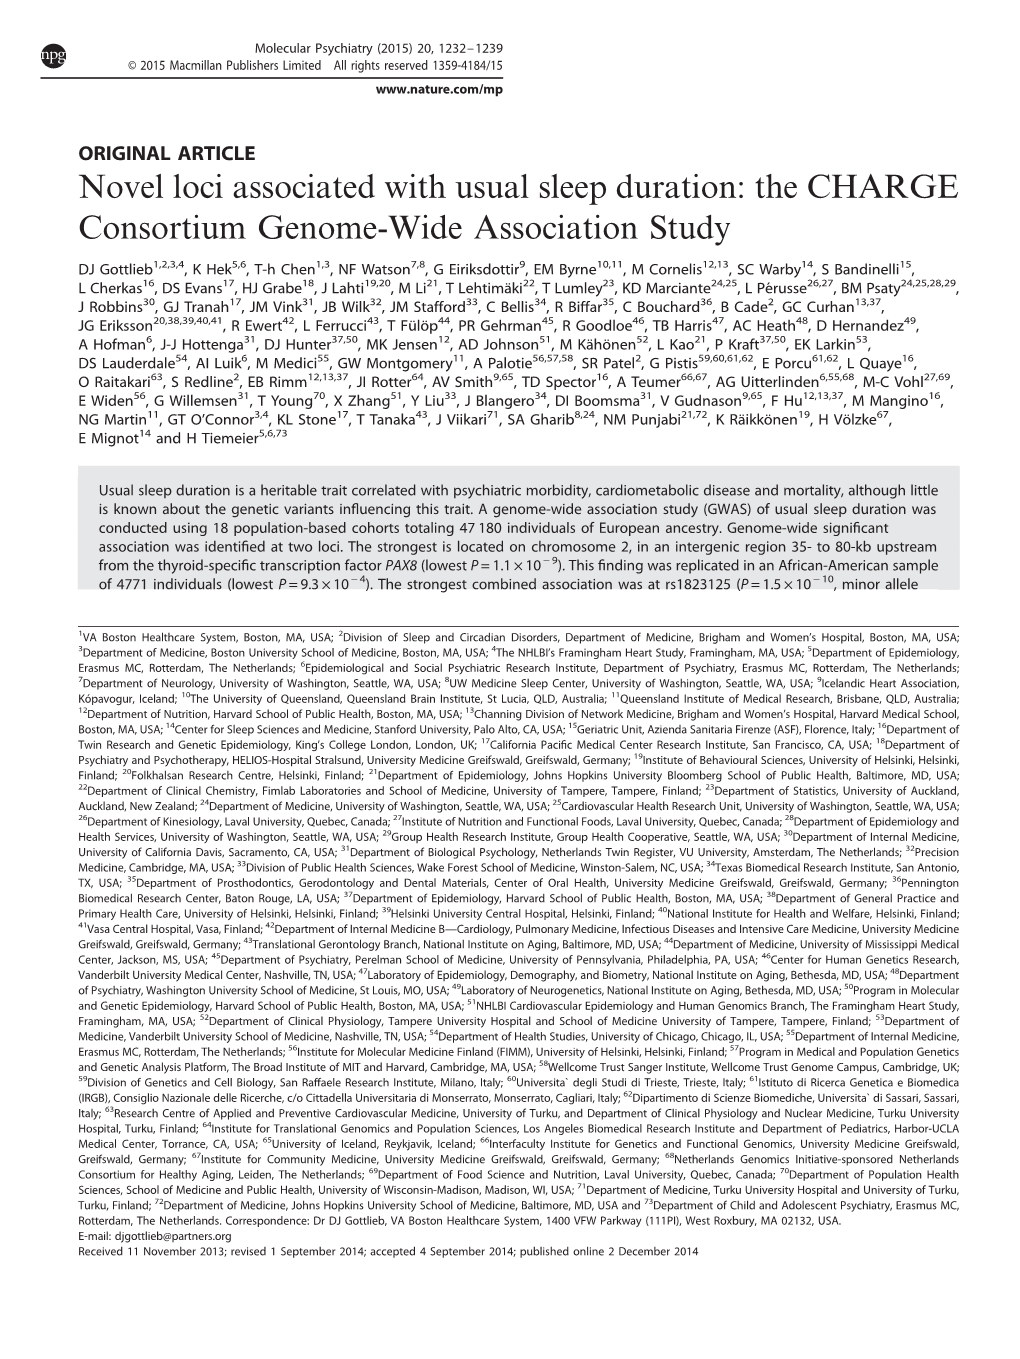 The CHARGE Consortium Genome-Wide Association Study